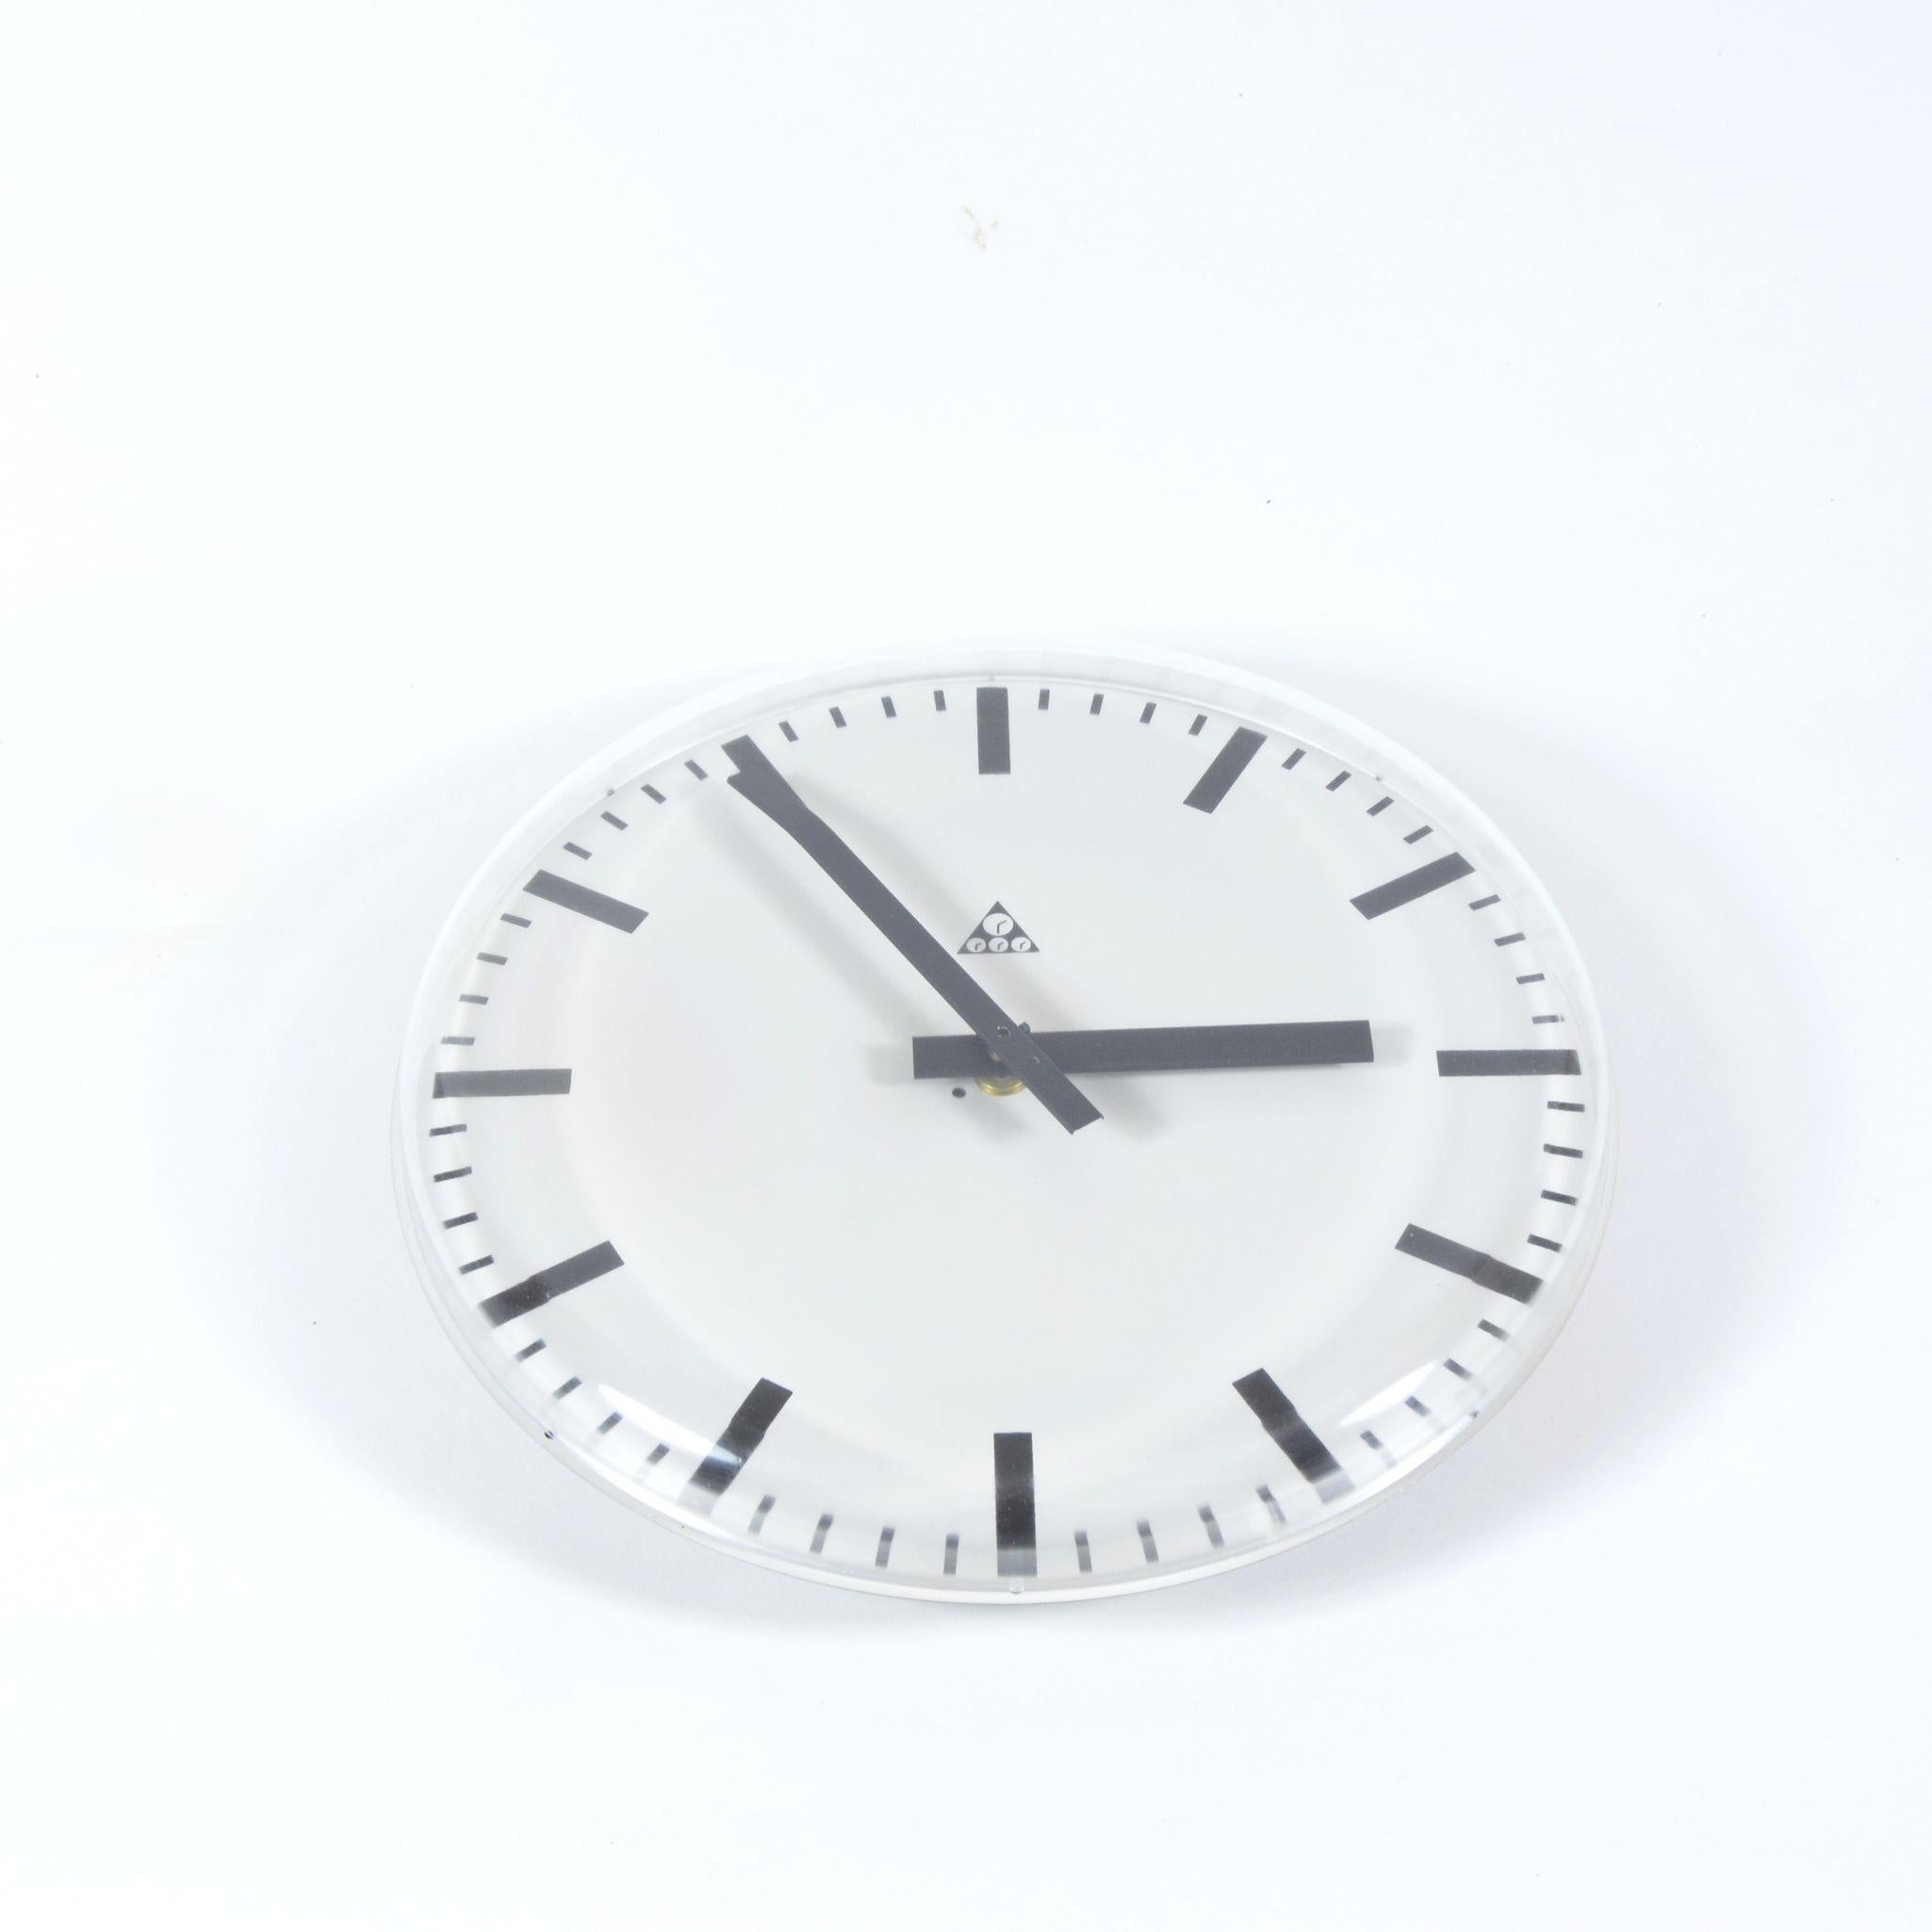 Plastic wall clock manufactured in former Czechoslovakia by famous clock manufacture Pragotron. This clock is special model without any frame. Clock is converted into a battery-powered clockwork working for 1 x AA battery. It operates as an